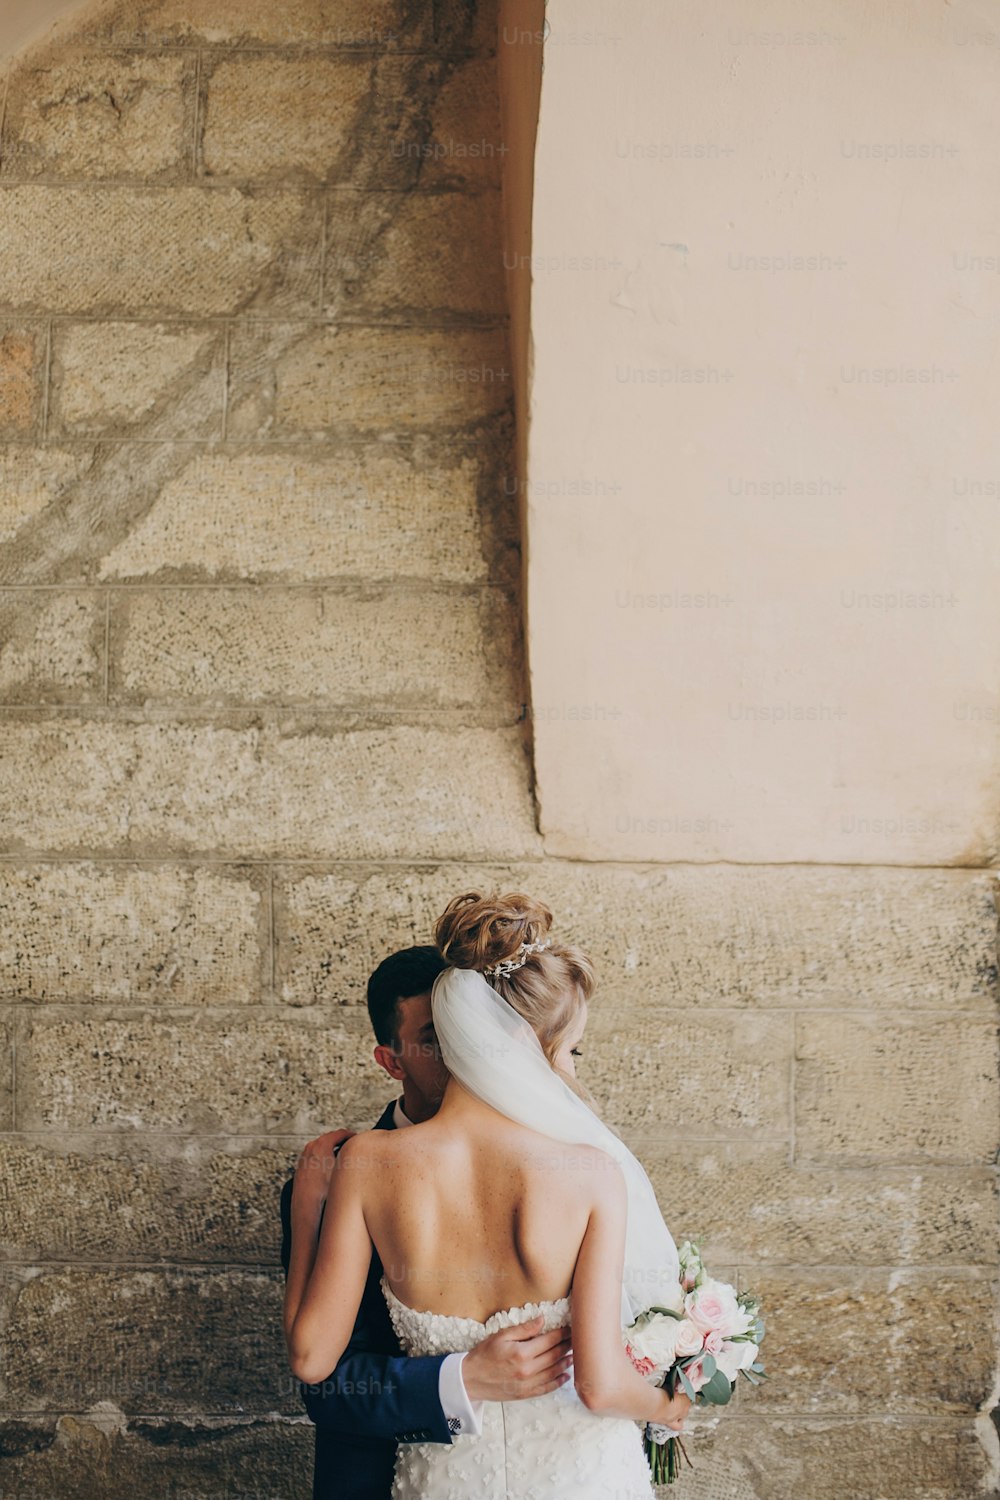 Stylish groom gently hugging beautiful bride back in city street. Gorgeous wedding couple of newlyweds sensually embracing at old buildings, back view. Romantic moment